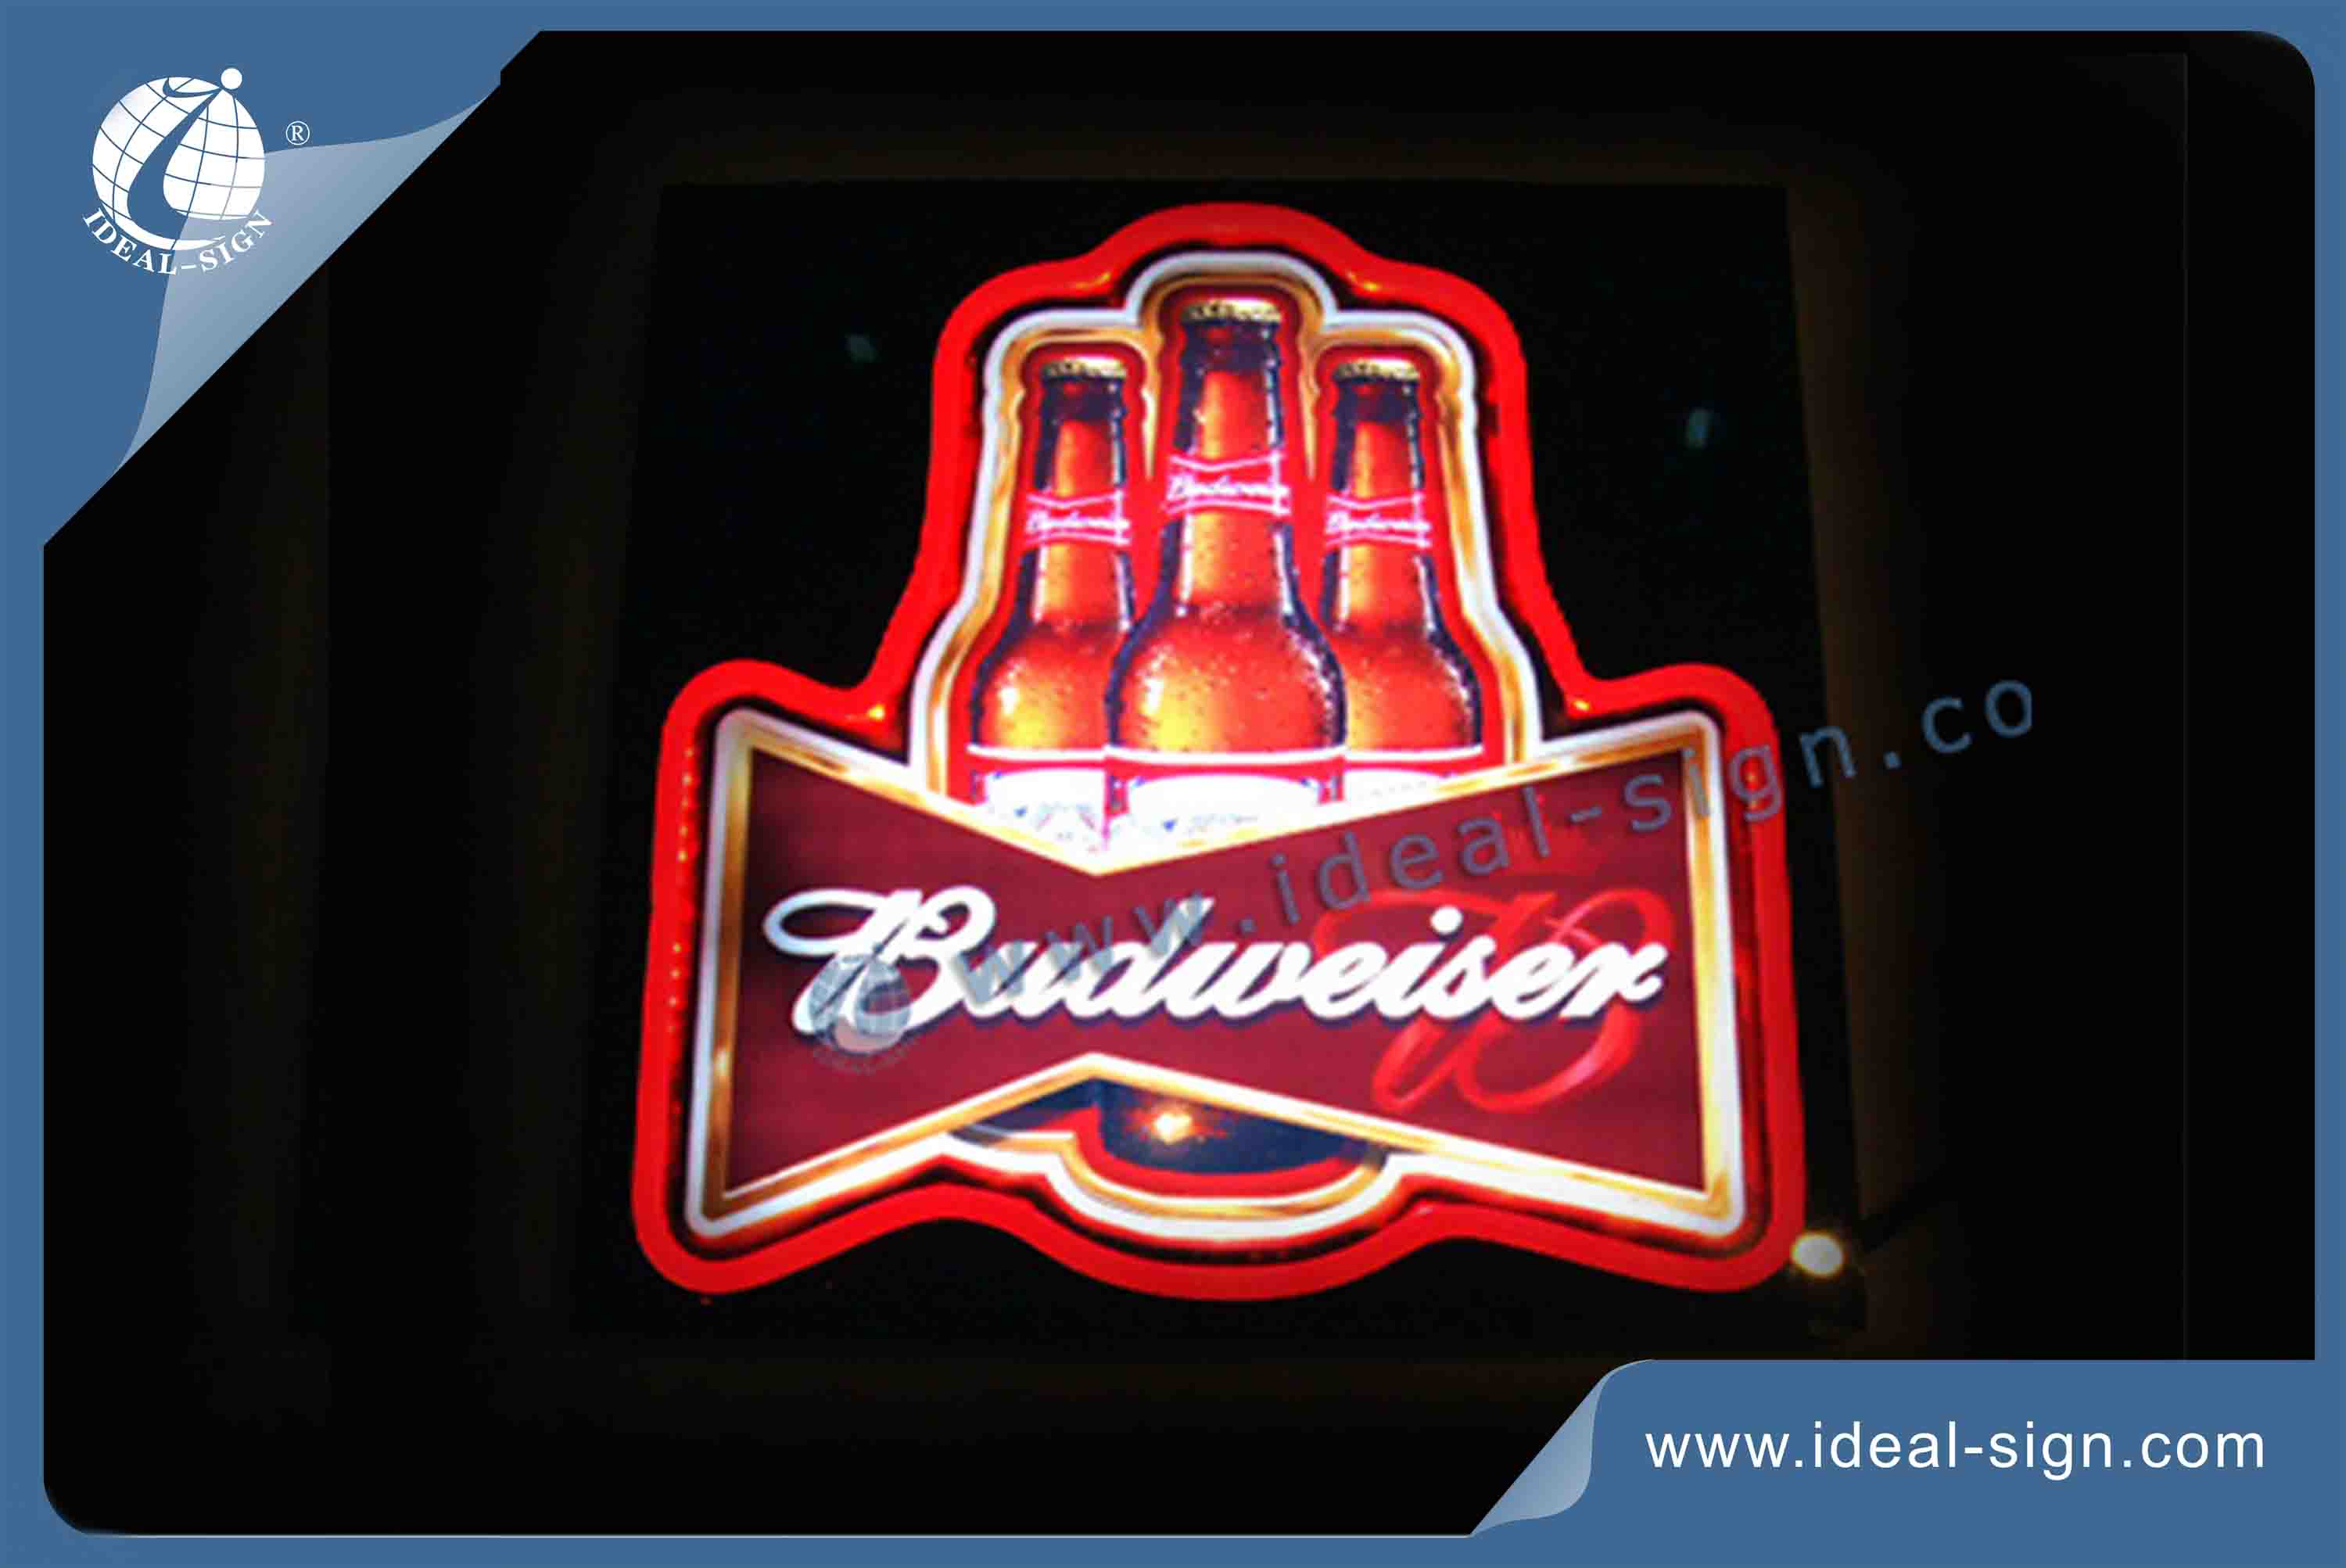 custom led neon sign
LED neon sign
led neon signs for sale
led neon signs wholesale
neon advertising signs
neon indoor signs
acrylic led sign
acrylic led edge welcome sign
business signs indoor
custom led signs indoor